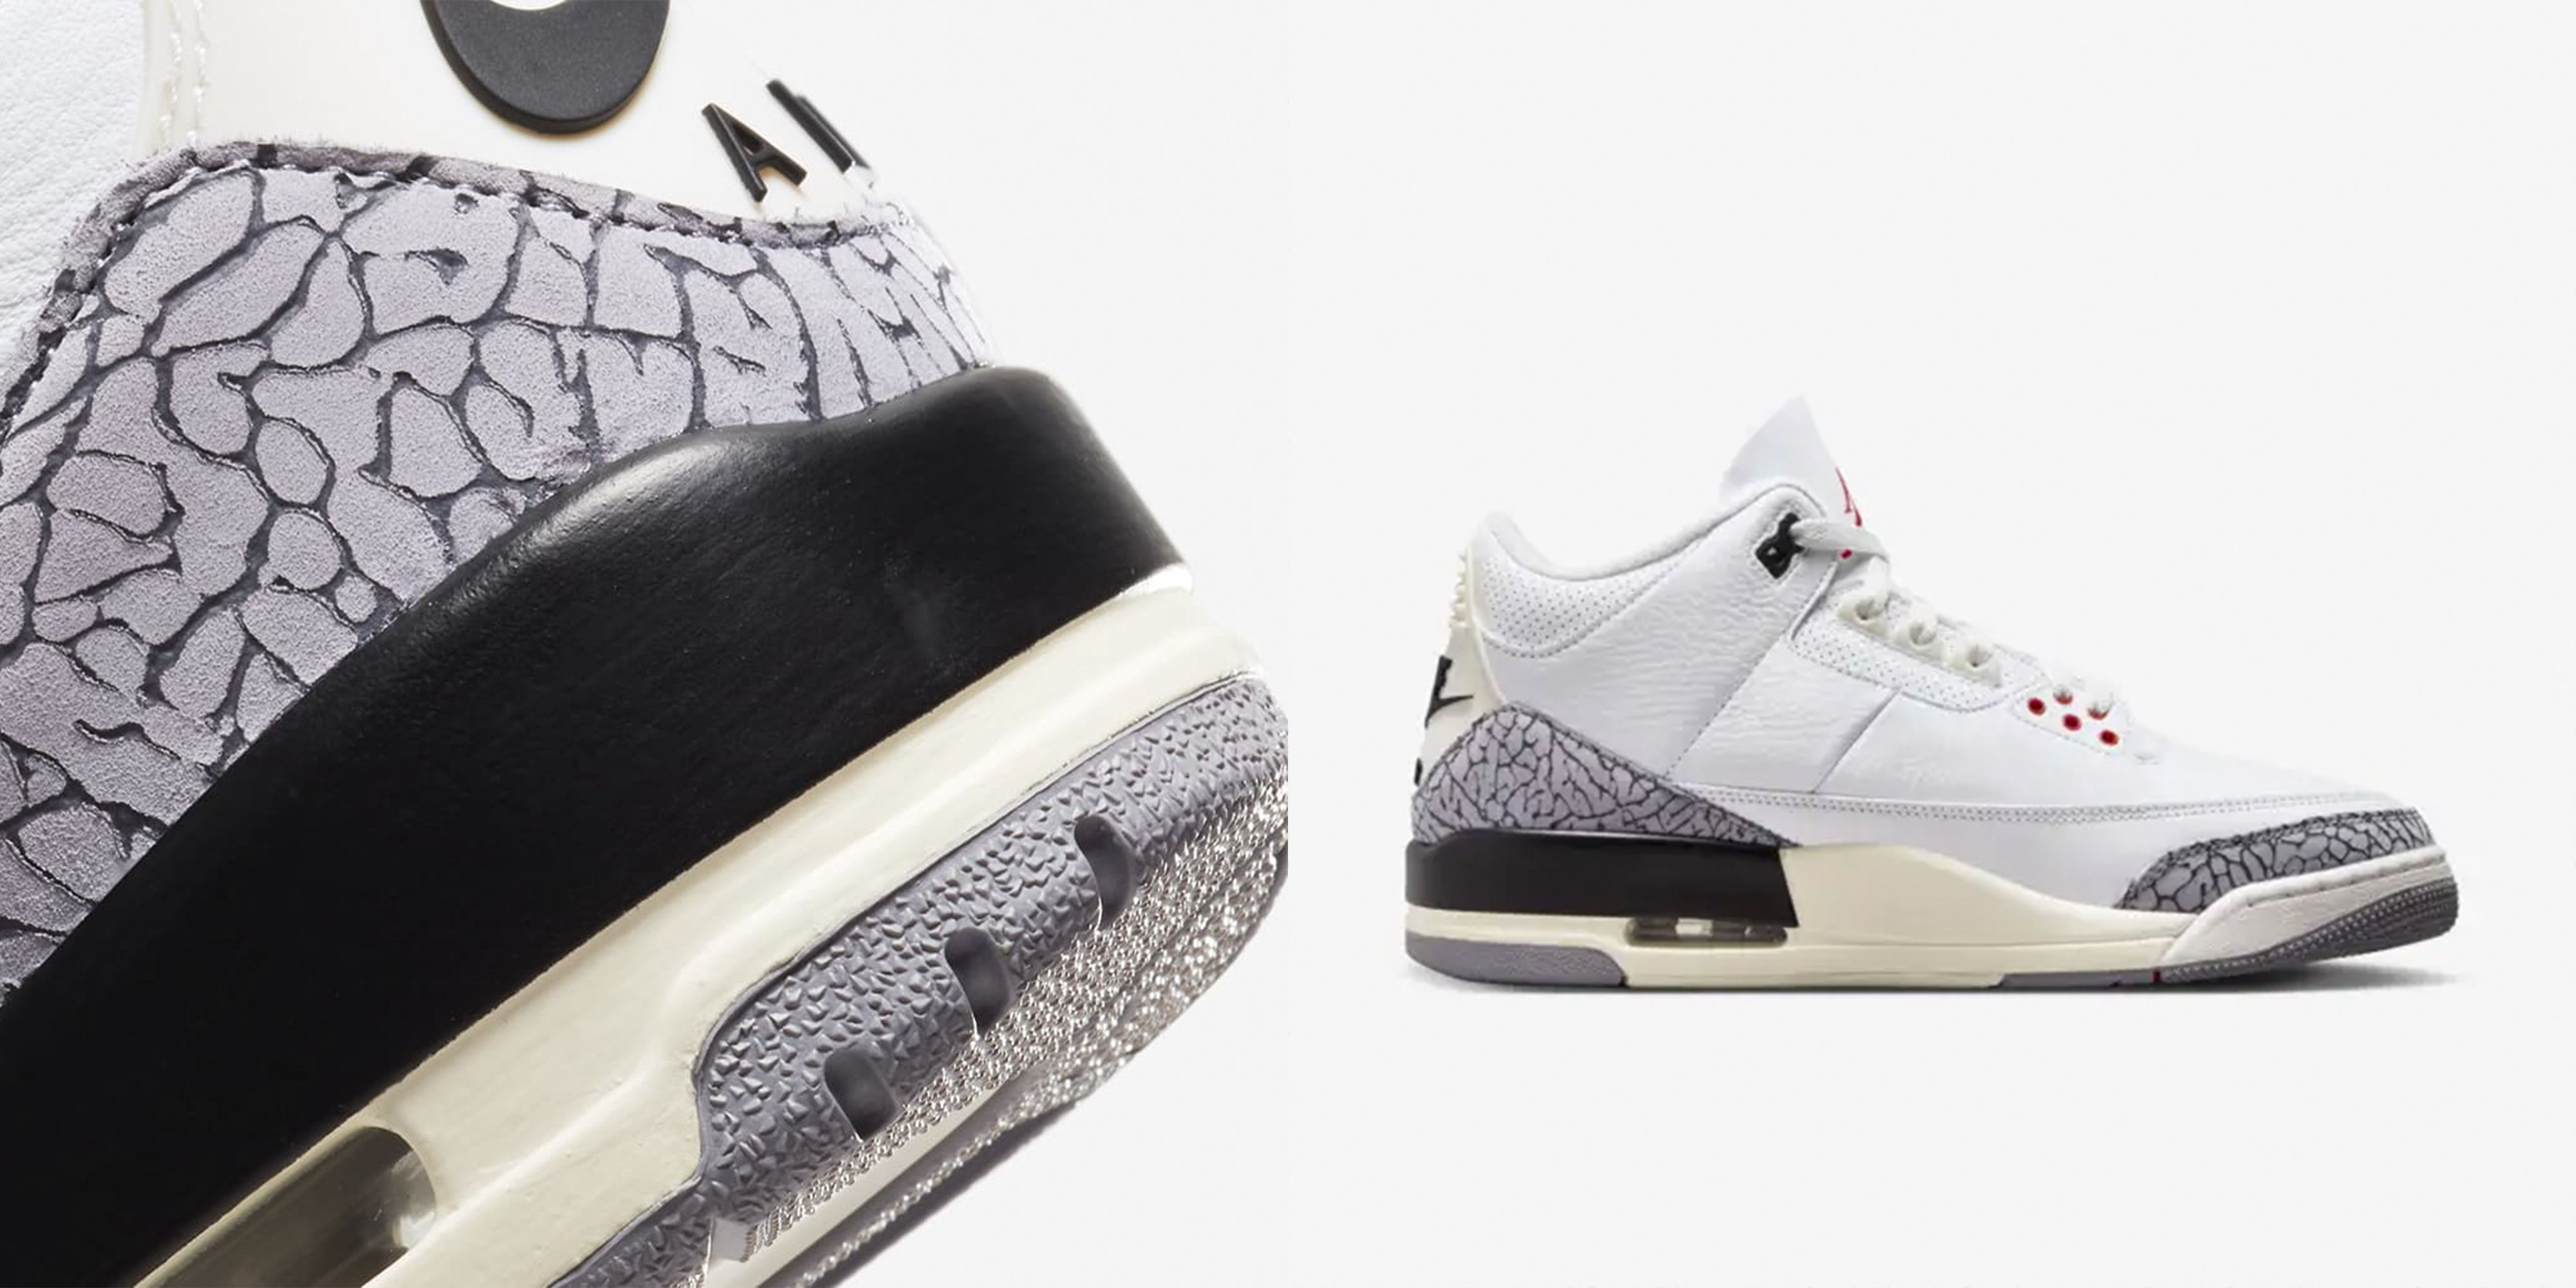 How to Buy the Air Jordan 3 'White Cement Re-Imagined' | Price 